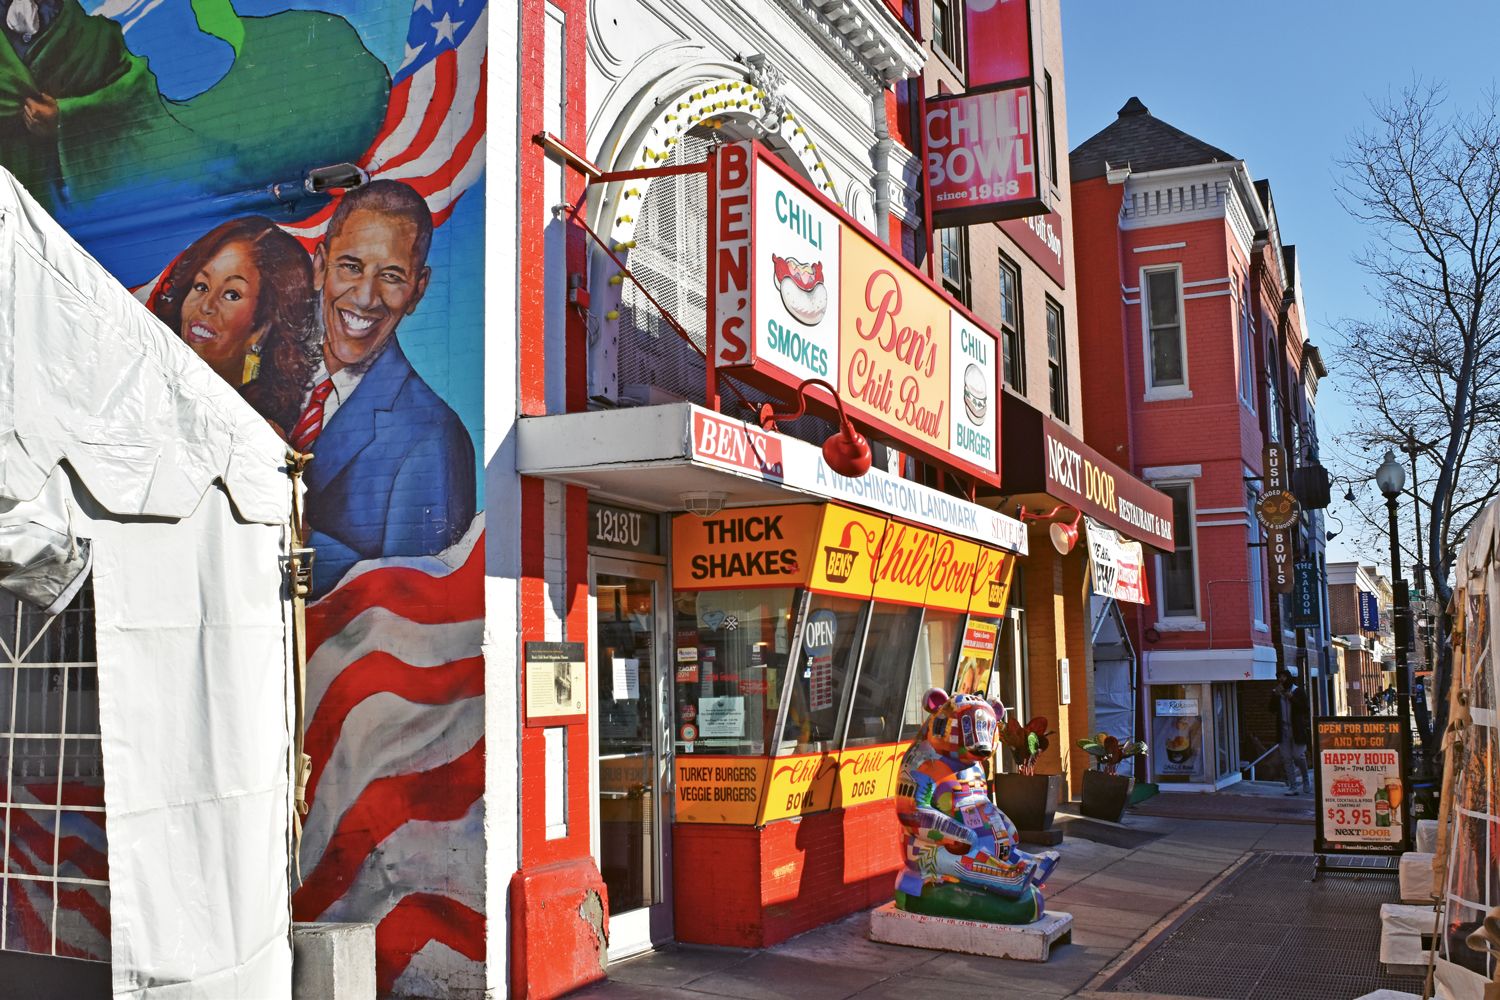 Ben’s Chili Bowl, an iconic eatery where civil rights leaders gathered in the 1960s. (Photo courtesy of Fork Tours)